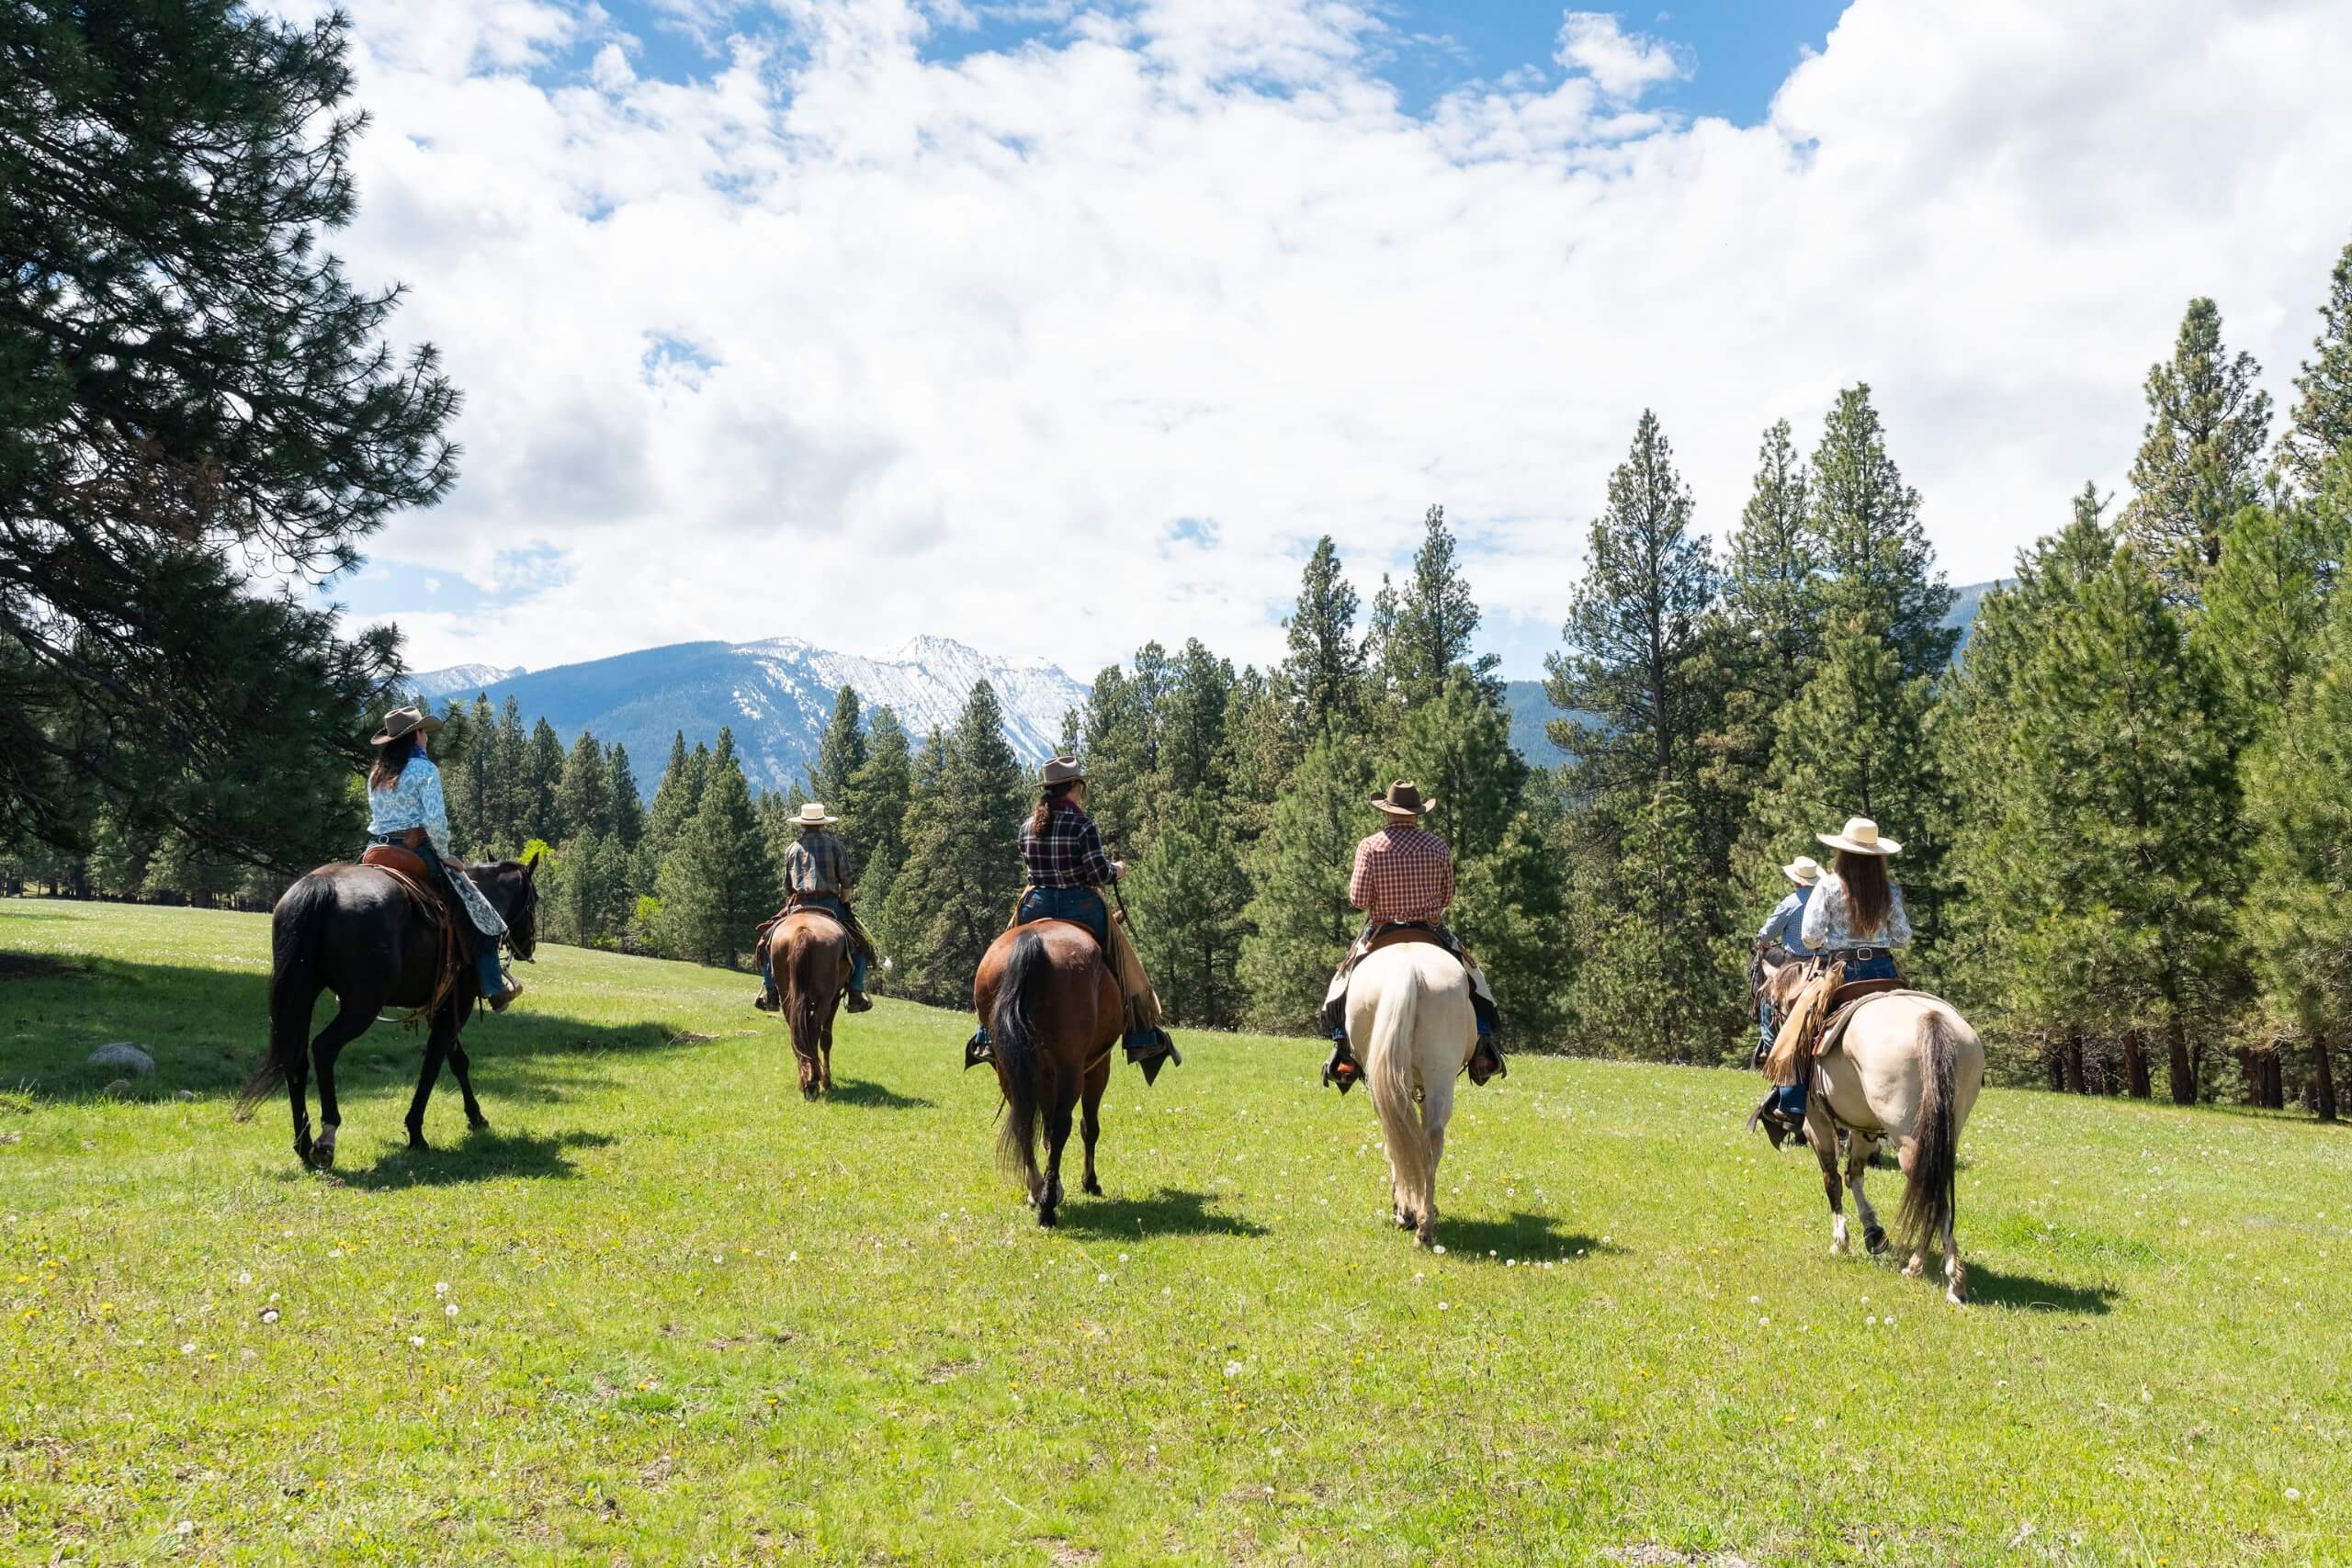 Guests on a scenic horse back ride with mountain views.